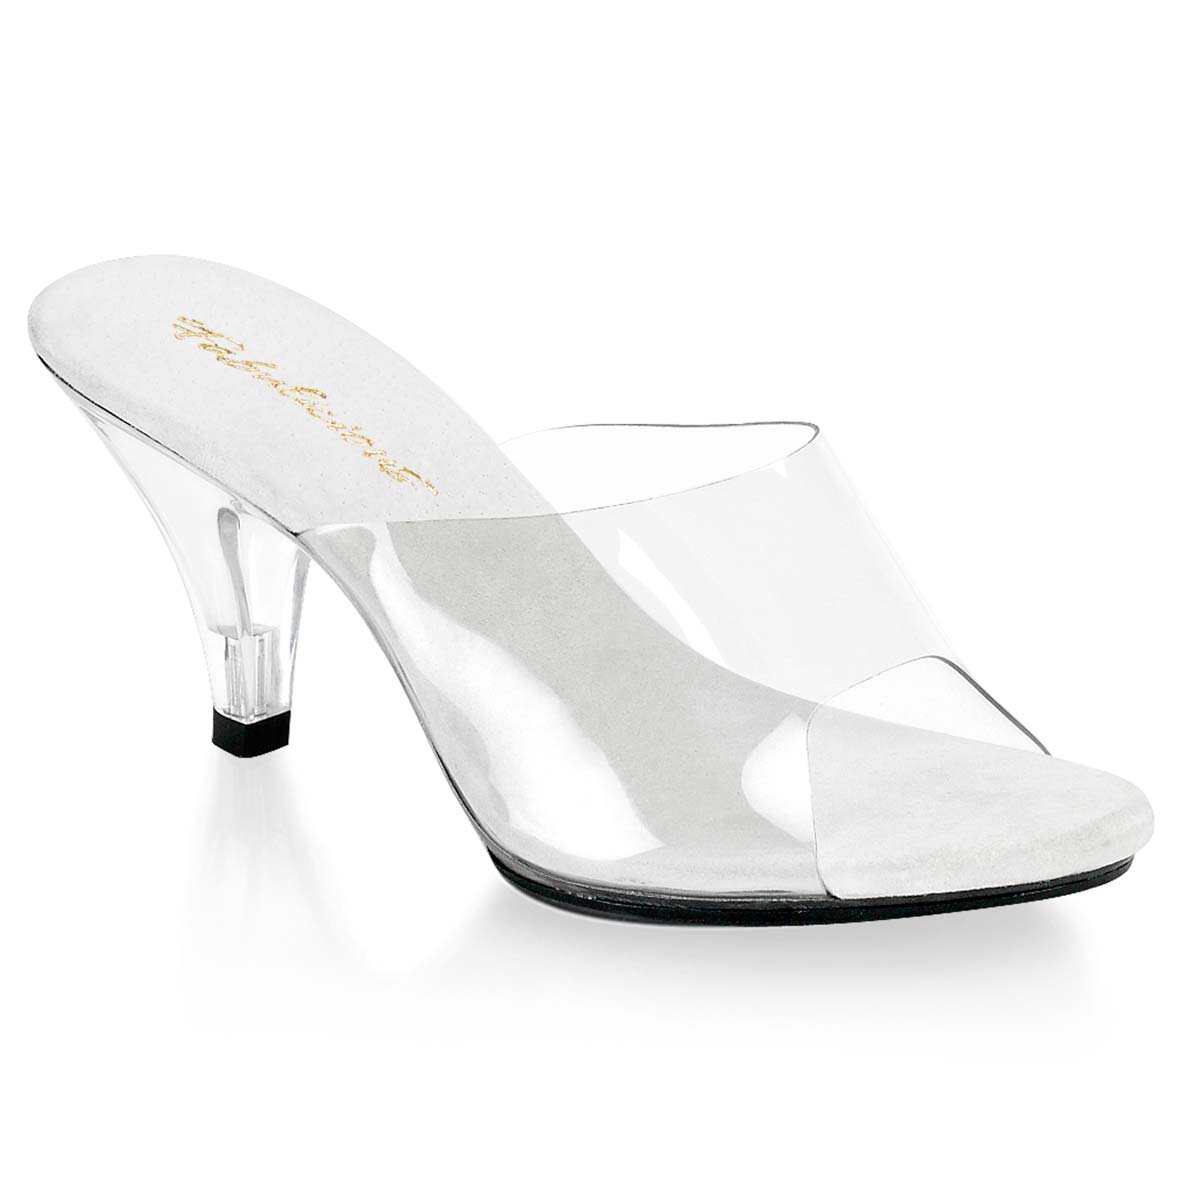 Pleaser Belle-301 - Clear/Clear in Sexy Heels & Platforms - $45.75